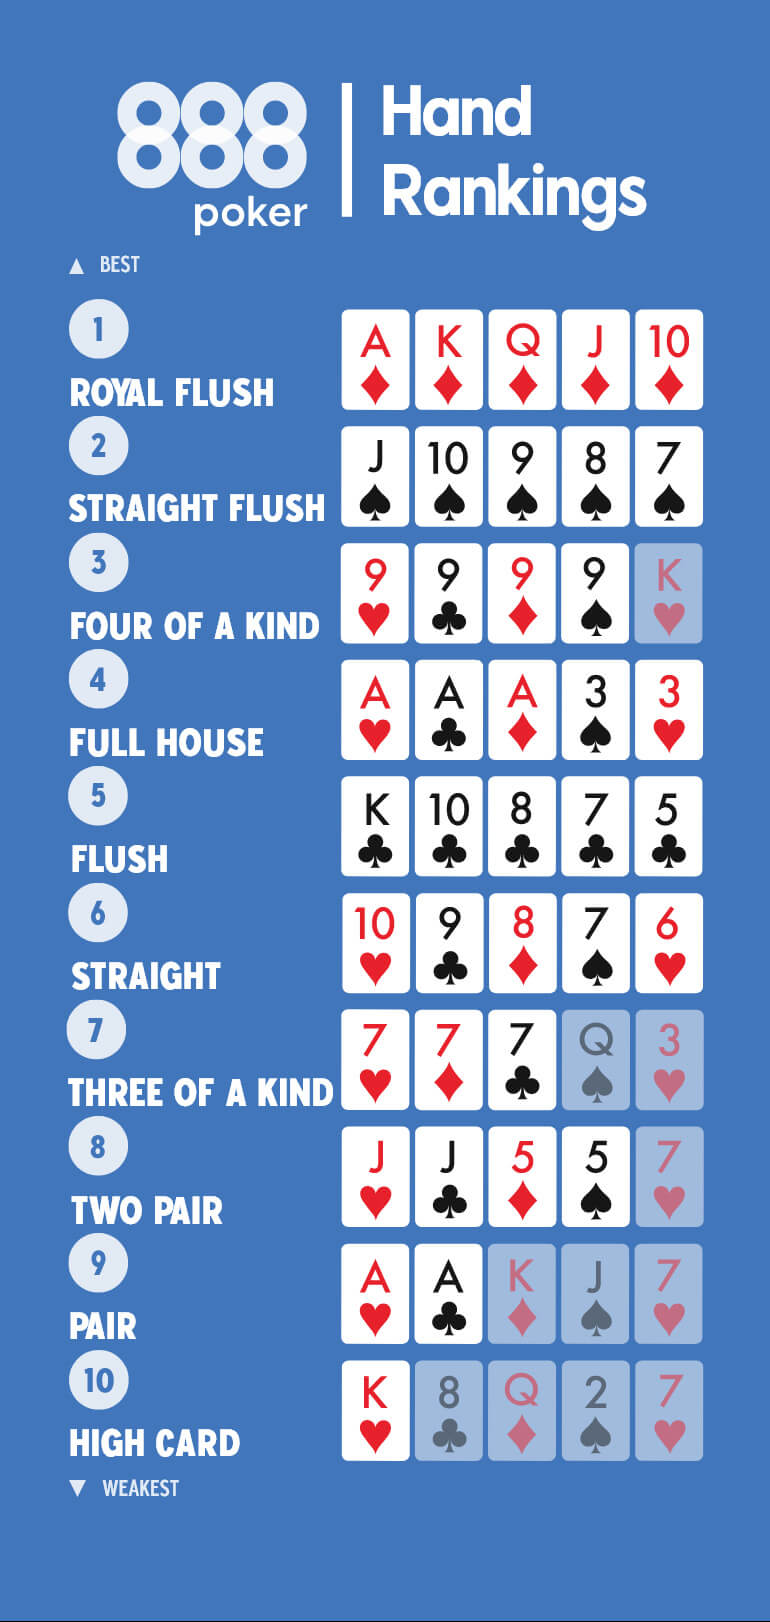 3 Short Stories You Didn't Know About poker flush tie breaker